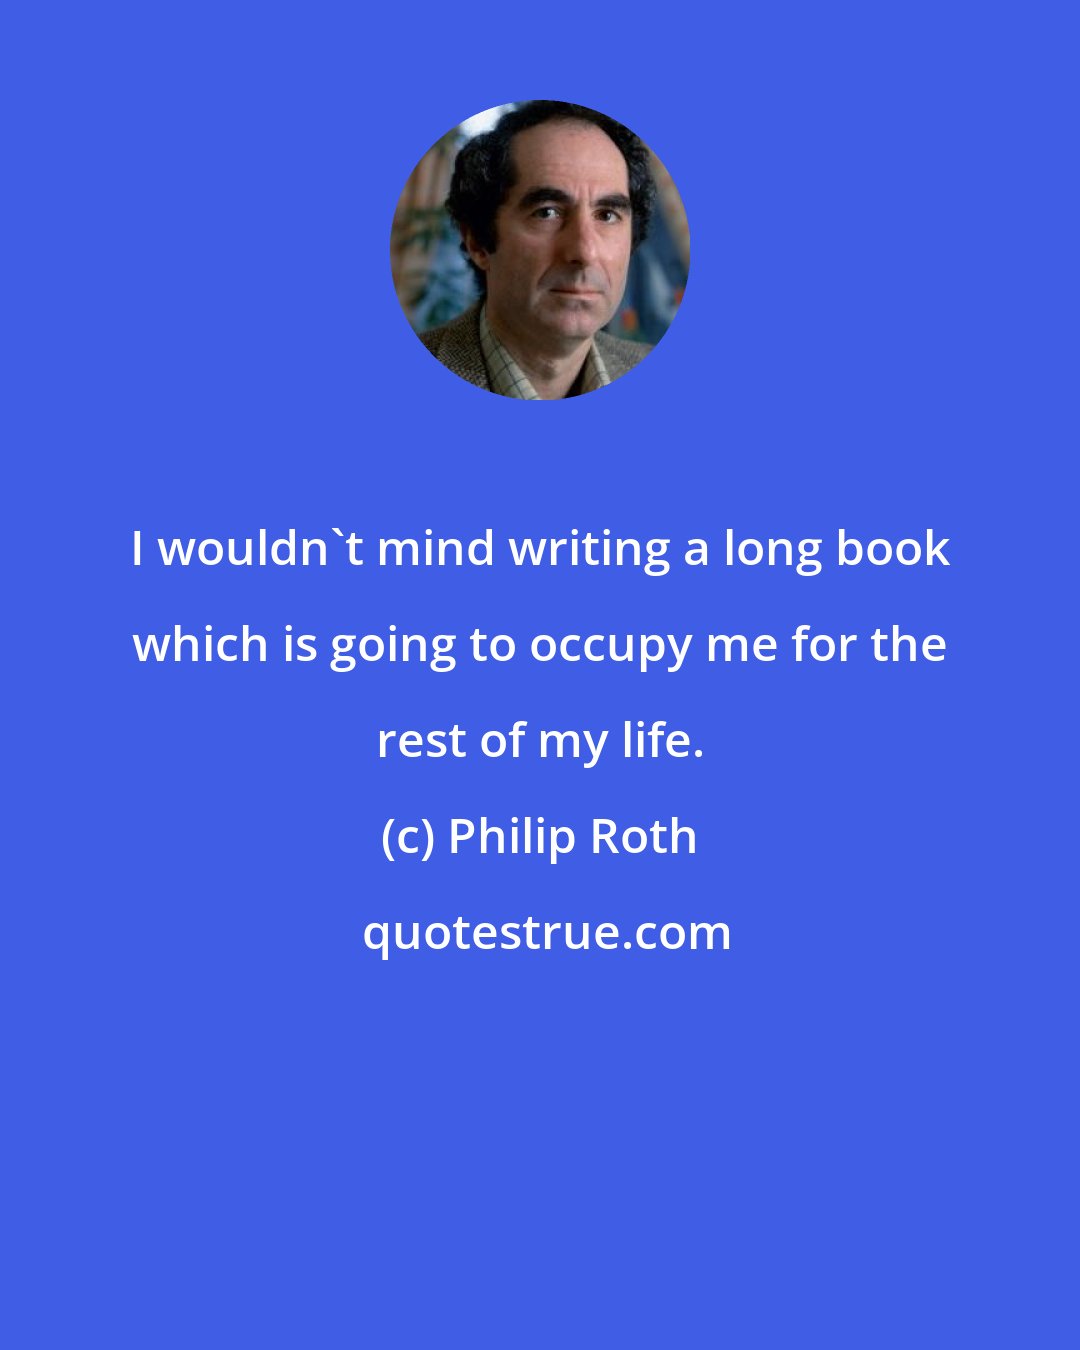 Philip Roth: I wouldn't mind writing a long book which is going to occupy me for the rest of my life.